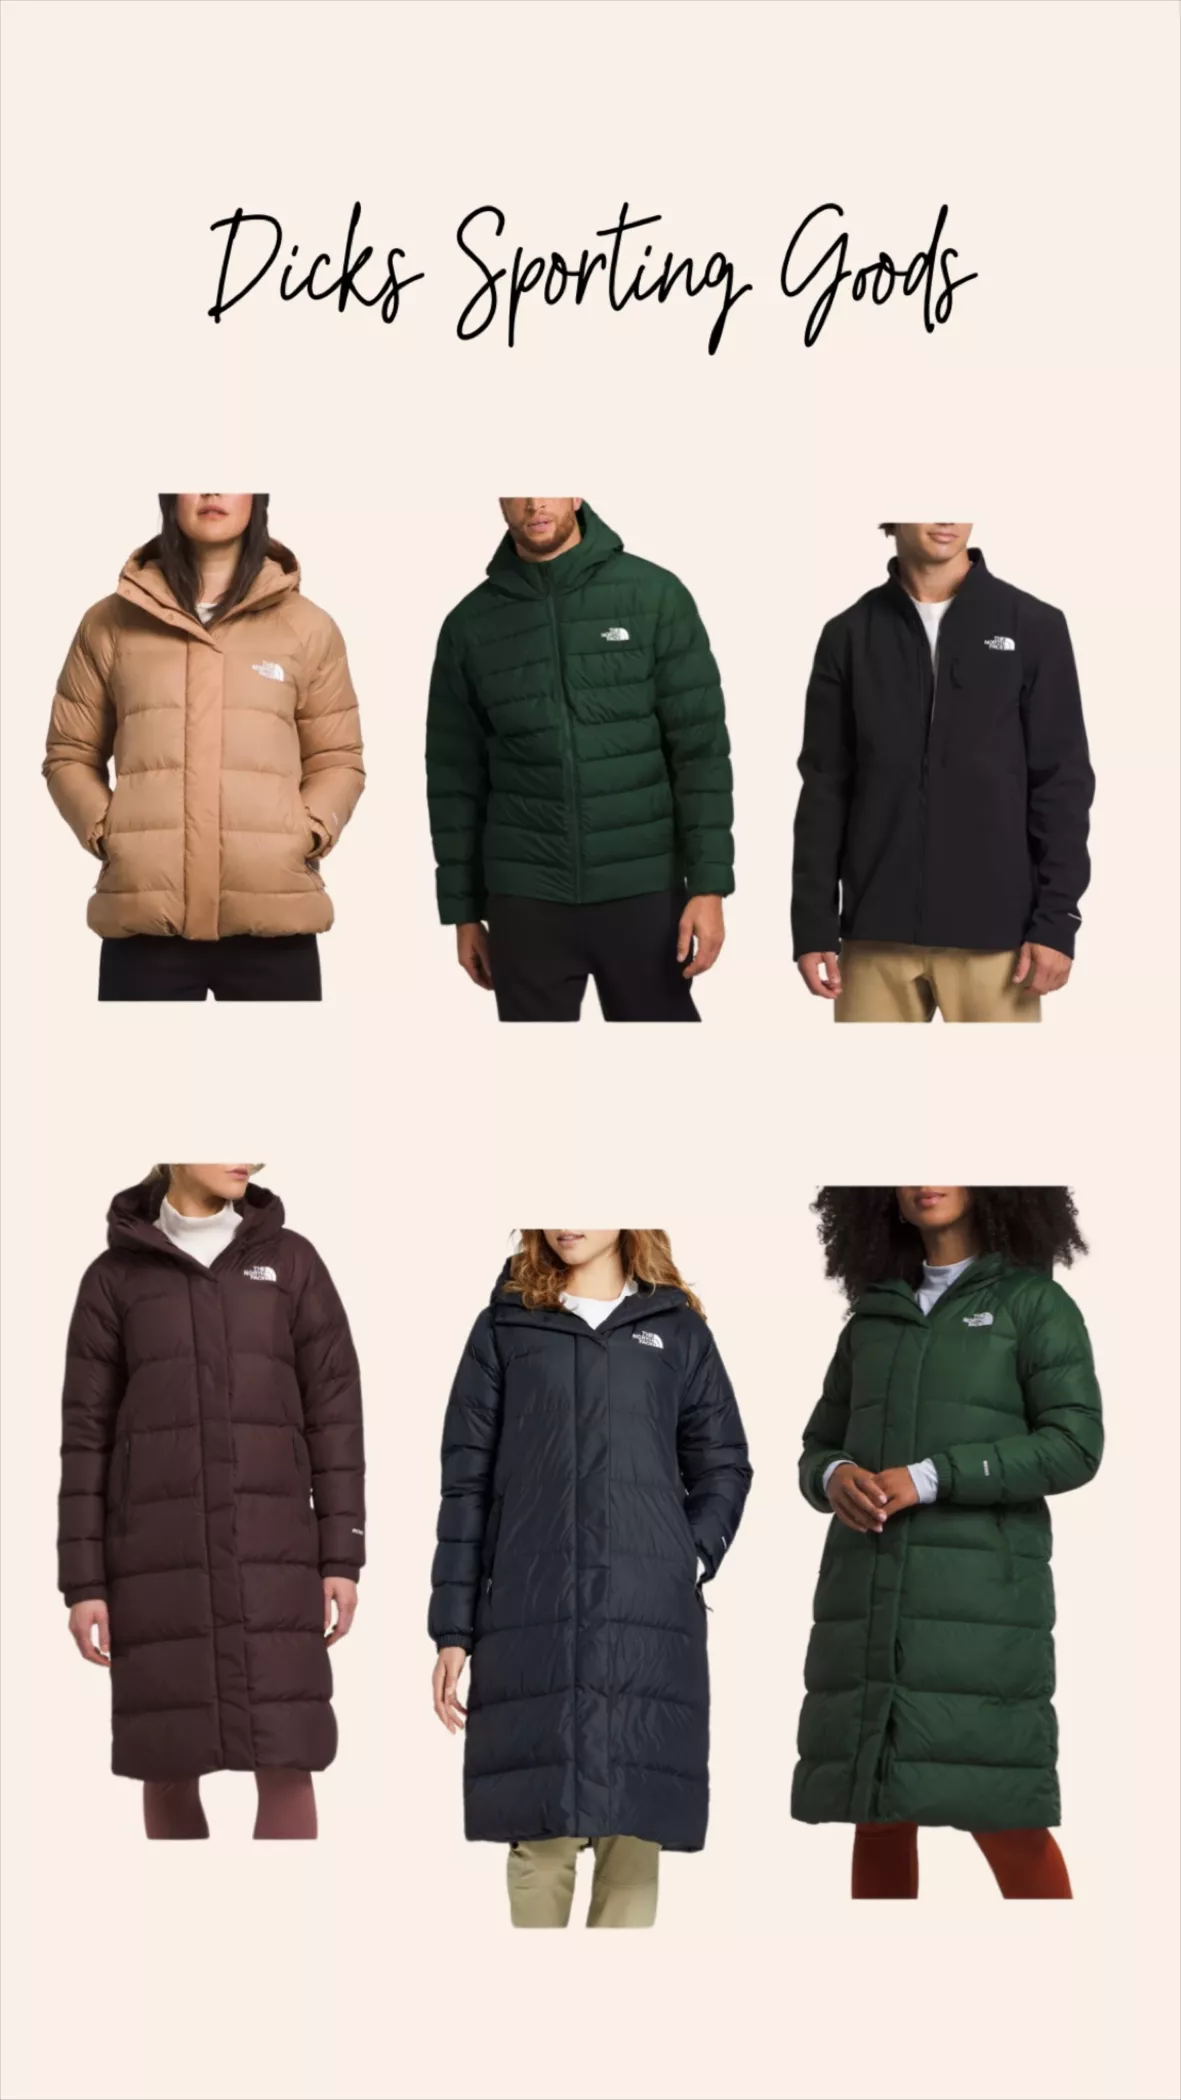 Women's Insulated Jackets  Best Price Guarantee at DICK'S